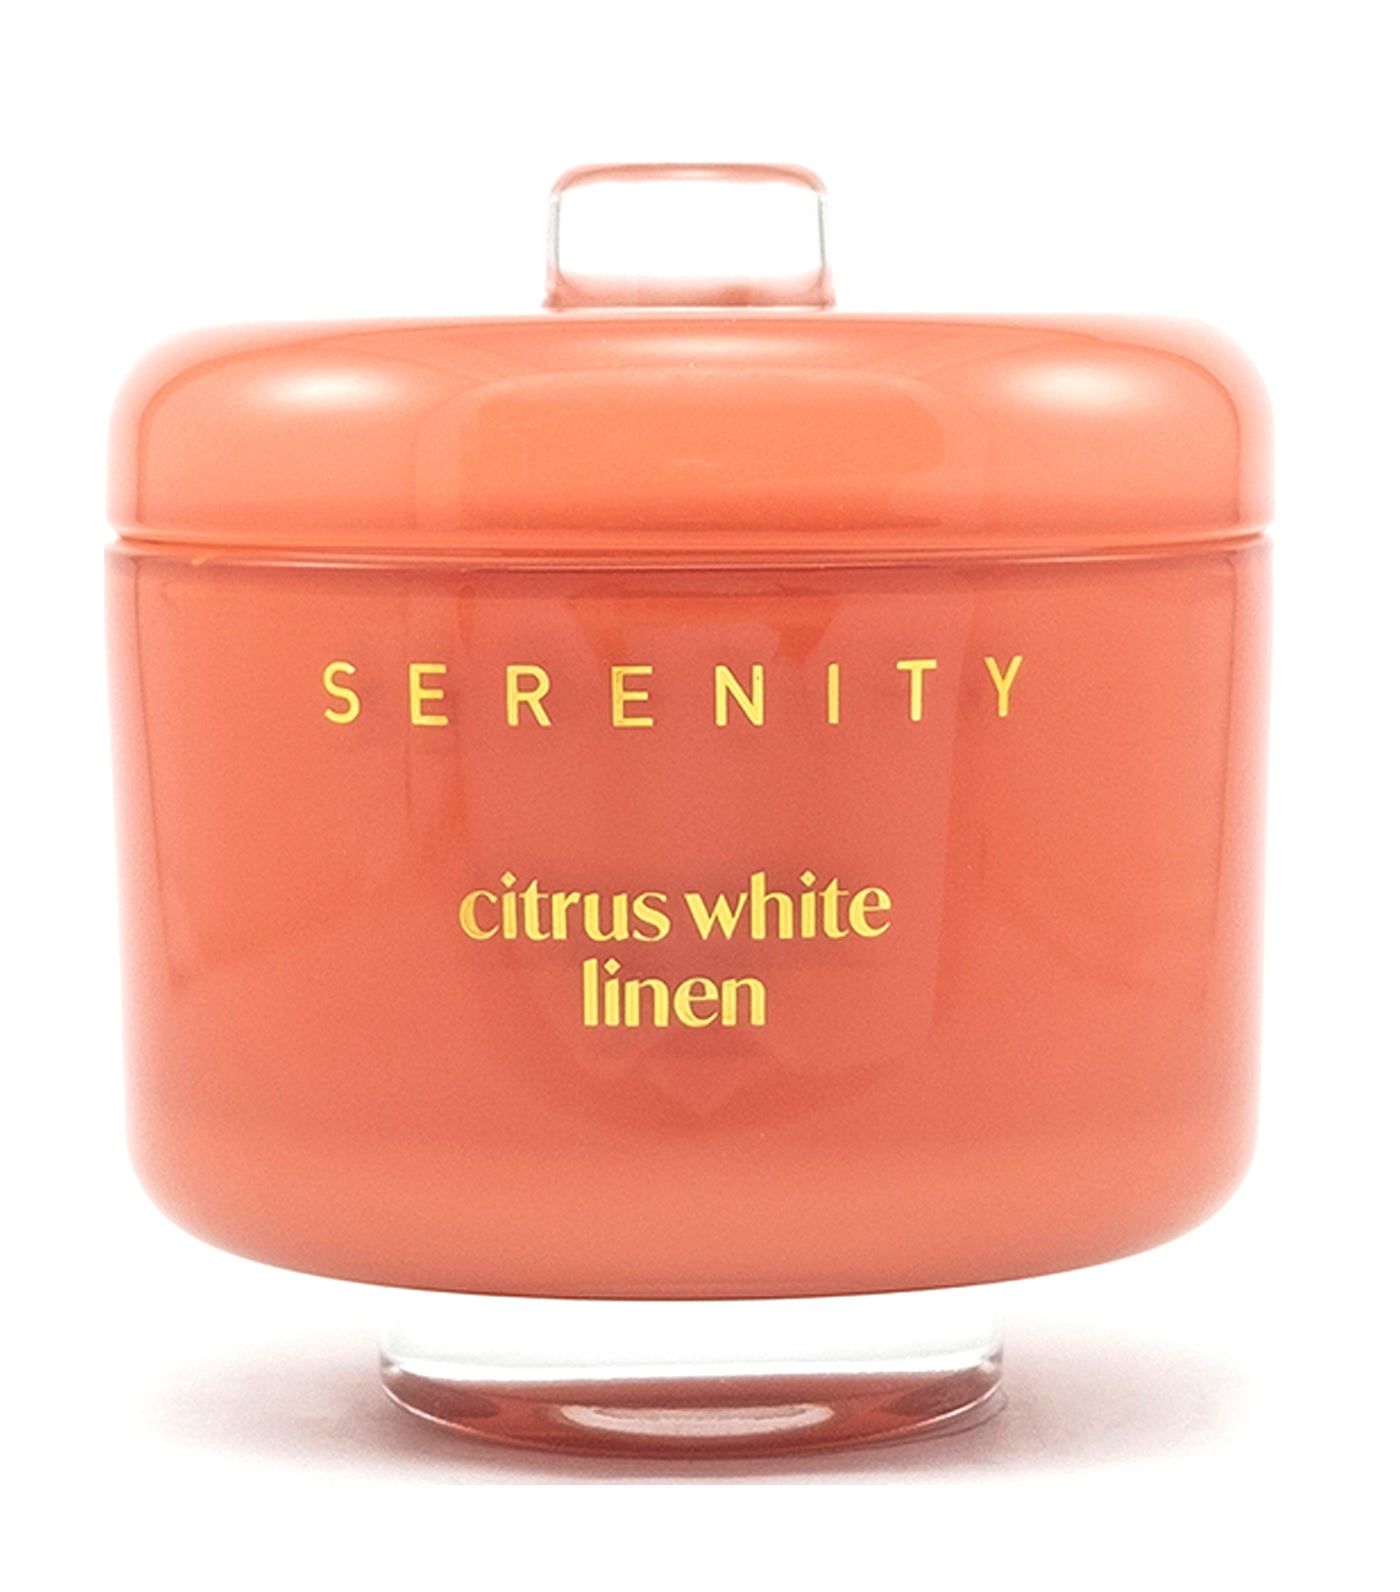 serenity vivid citrus white linen scented candle